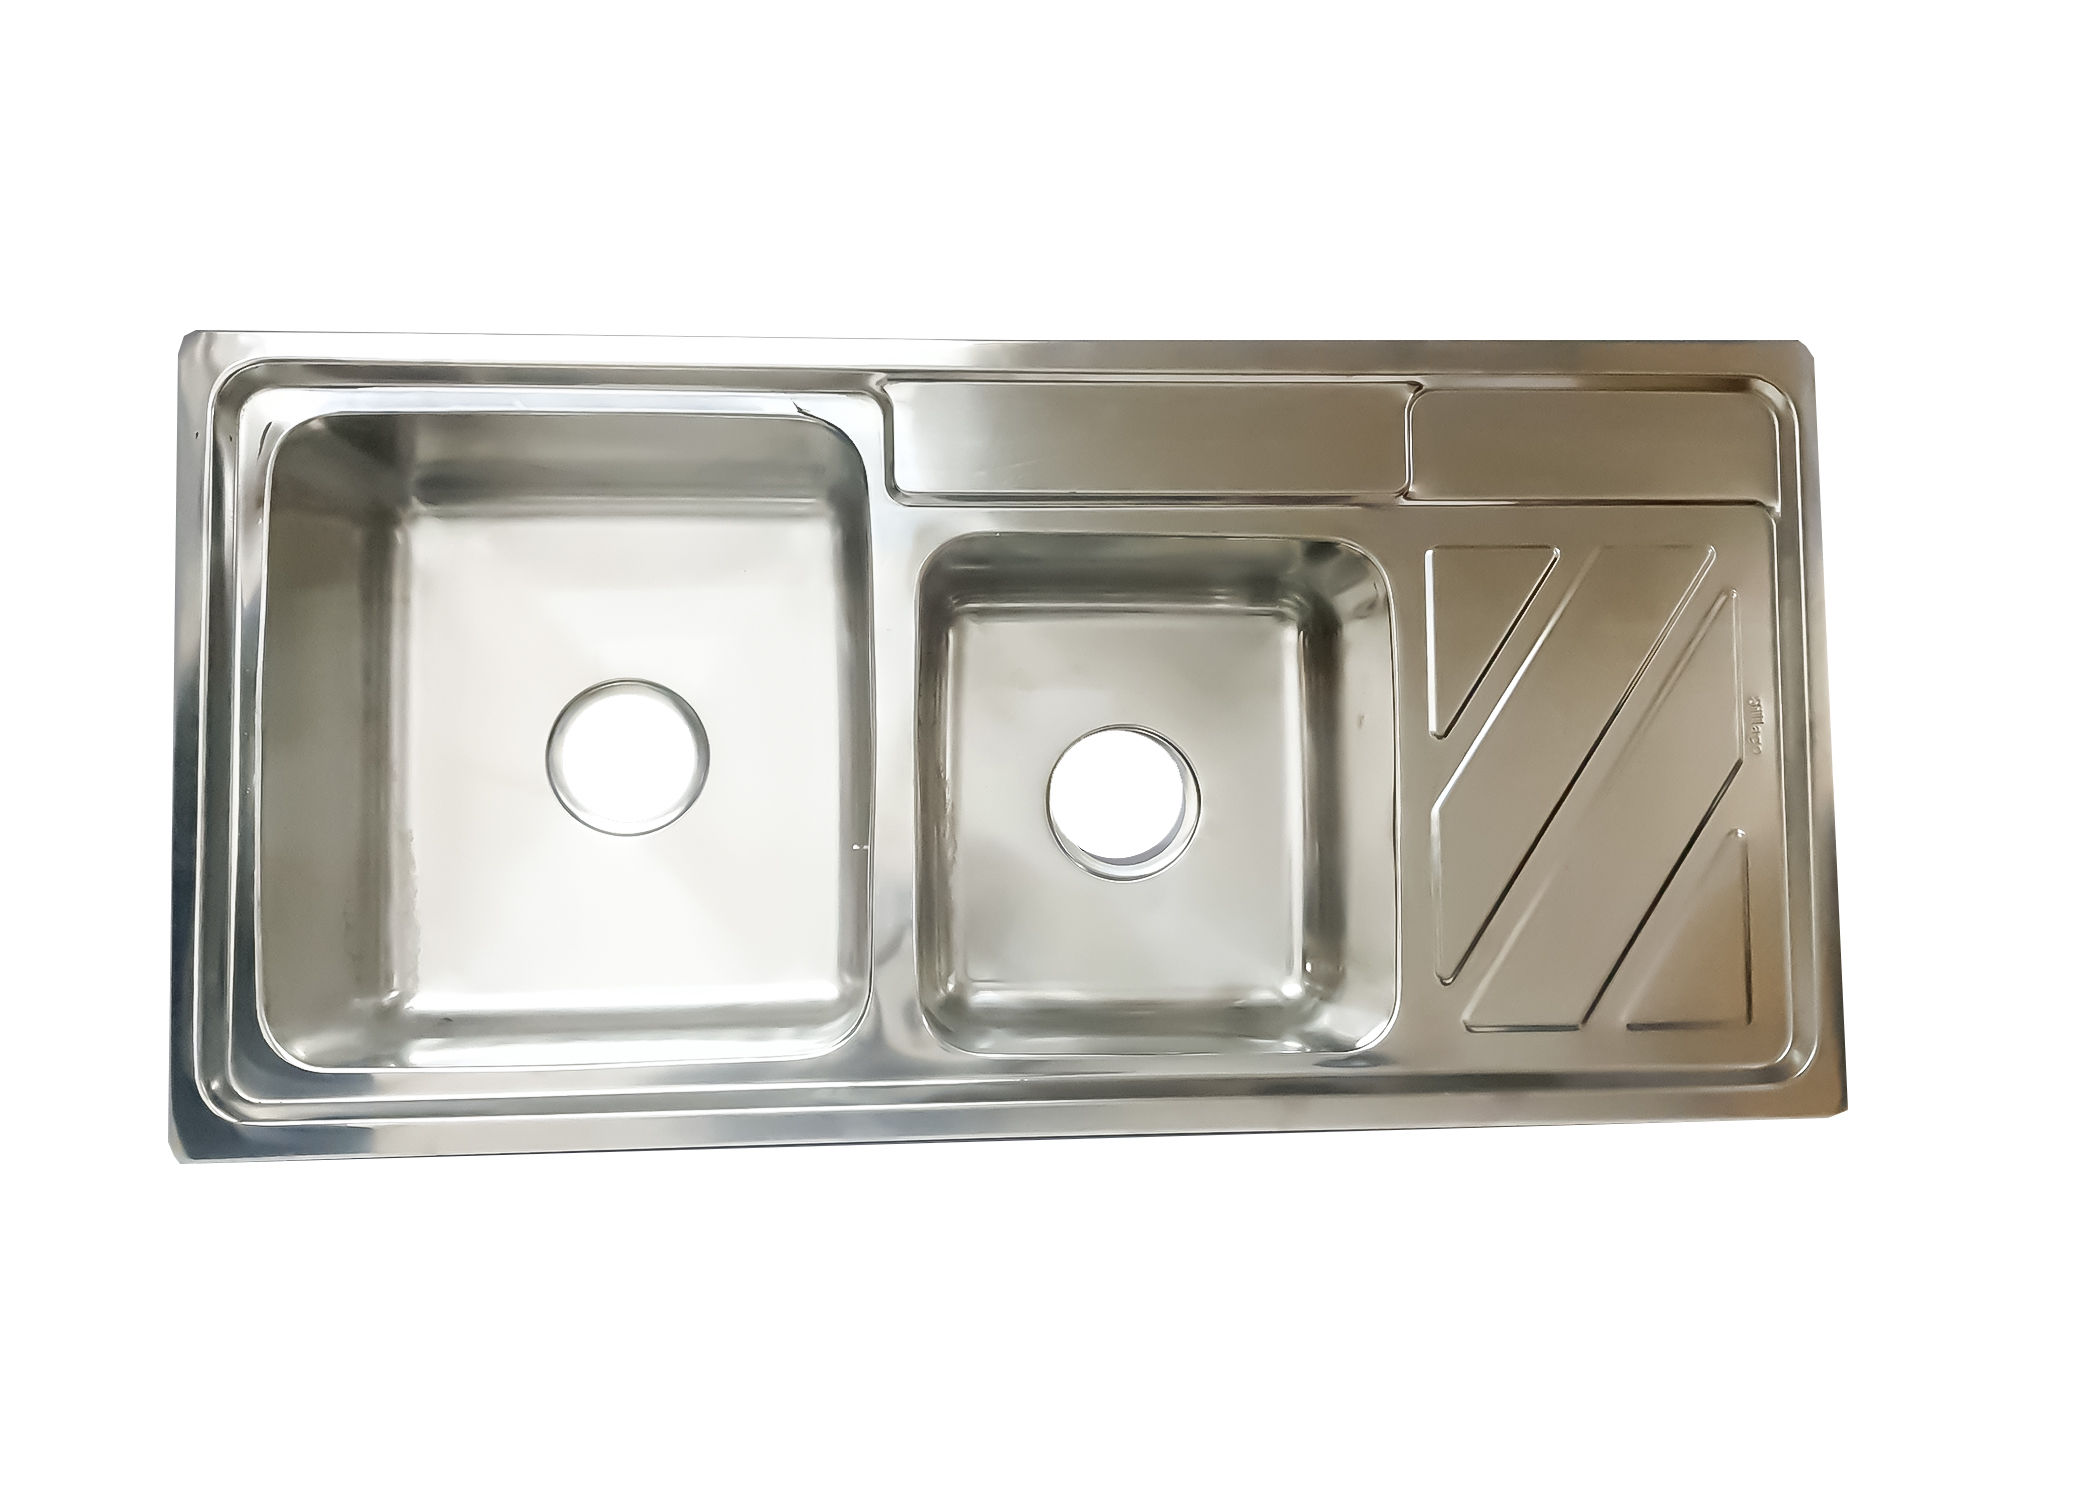 Sillago Anfisa Double Bowl With Side Kitchen Sink